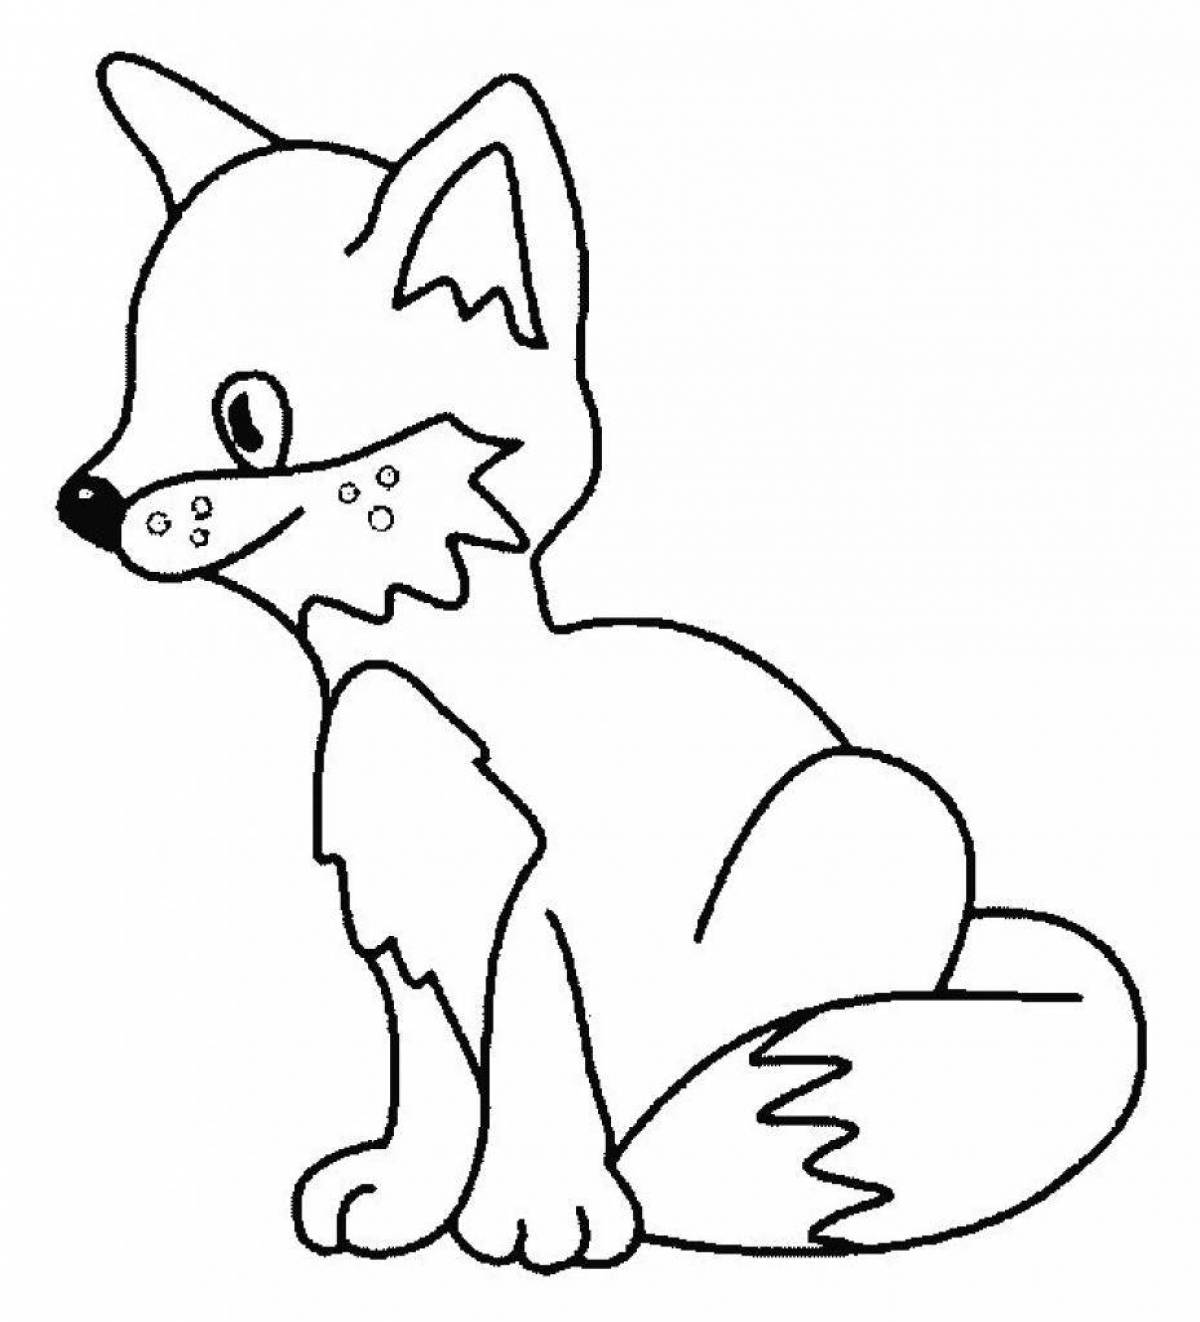 Whimsical fox coloring for kids